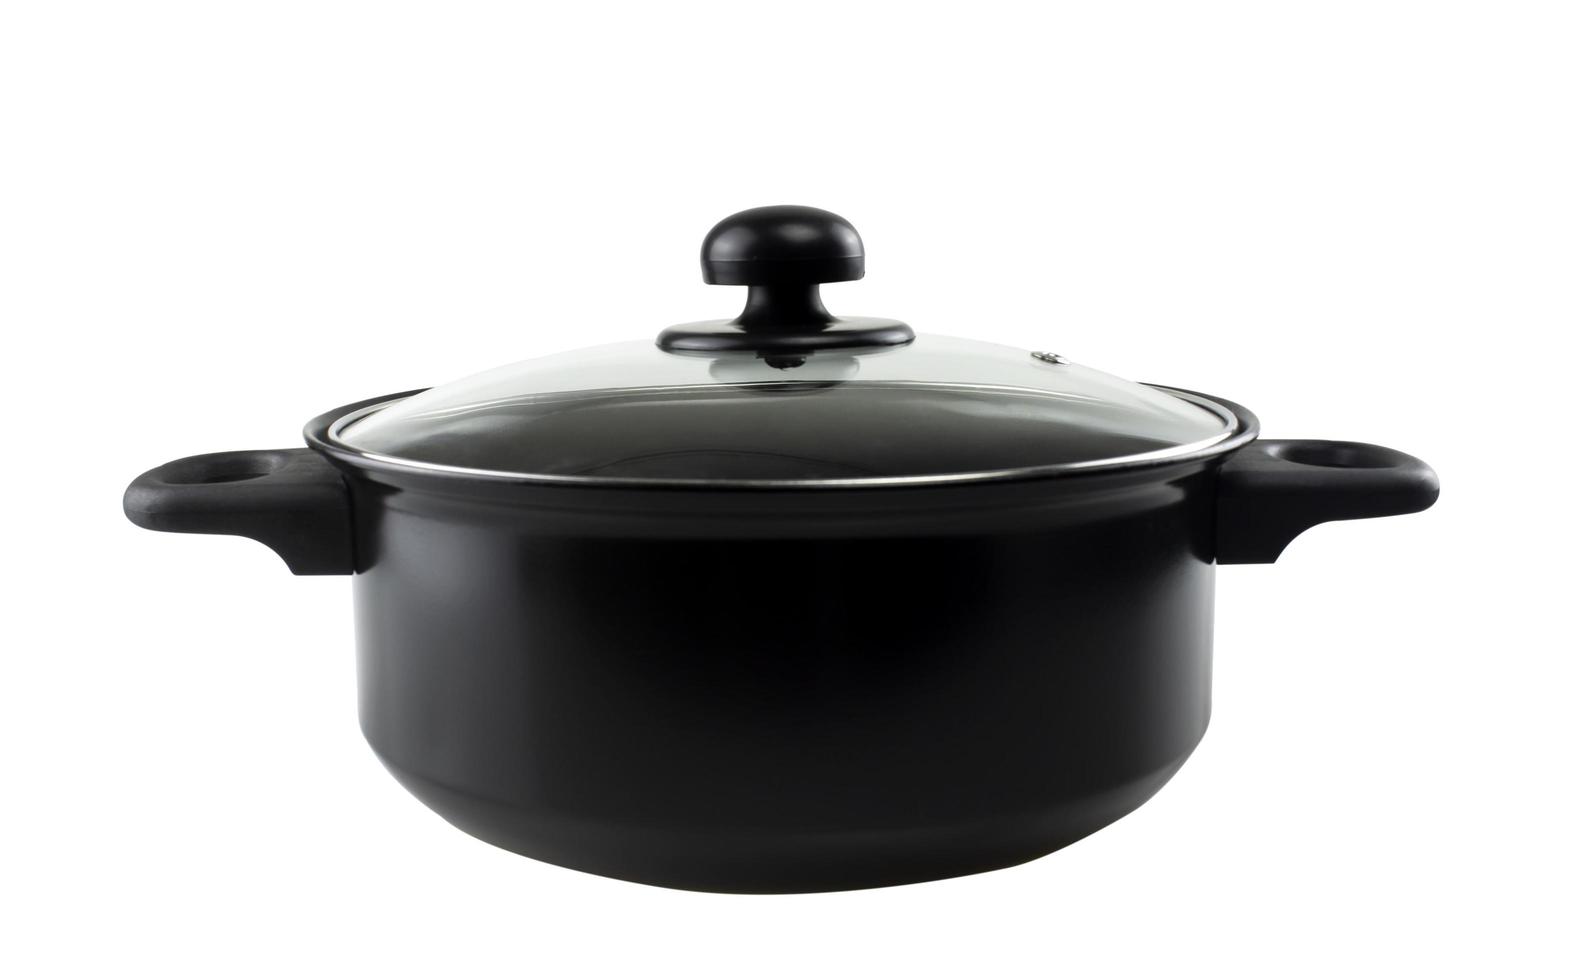 Stainless steel cooking pot black isolated on white background photo